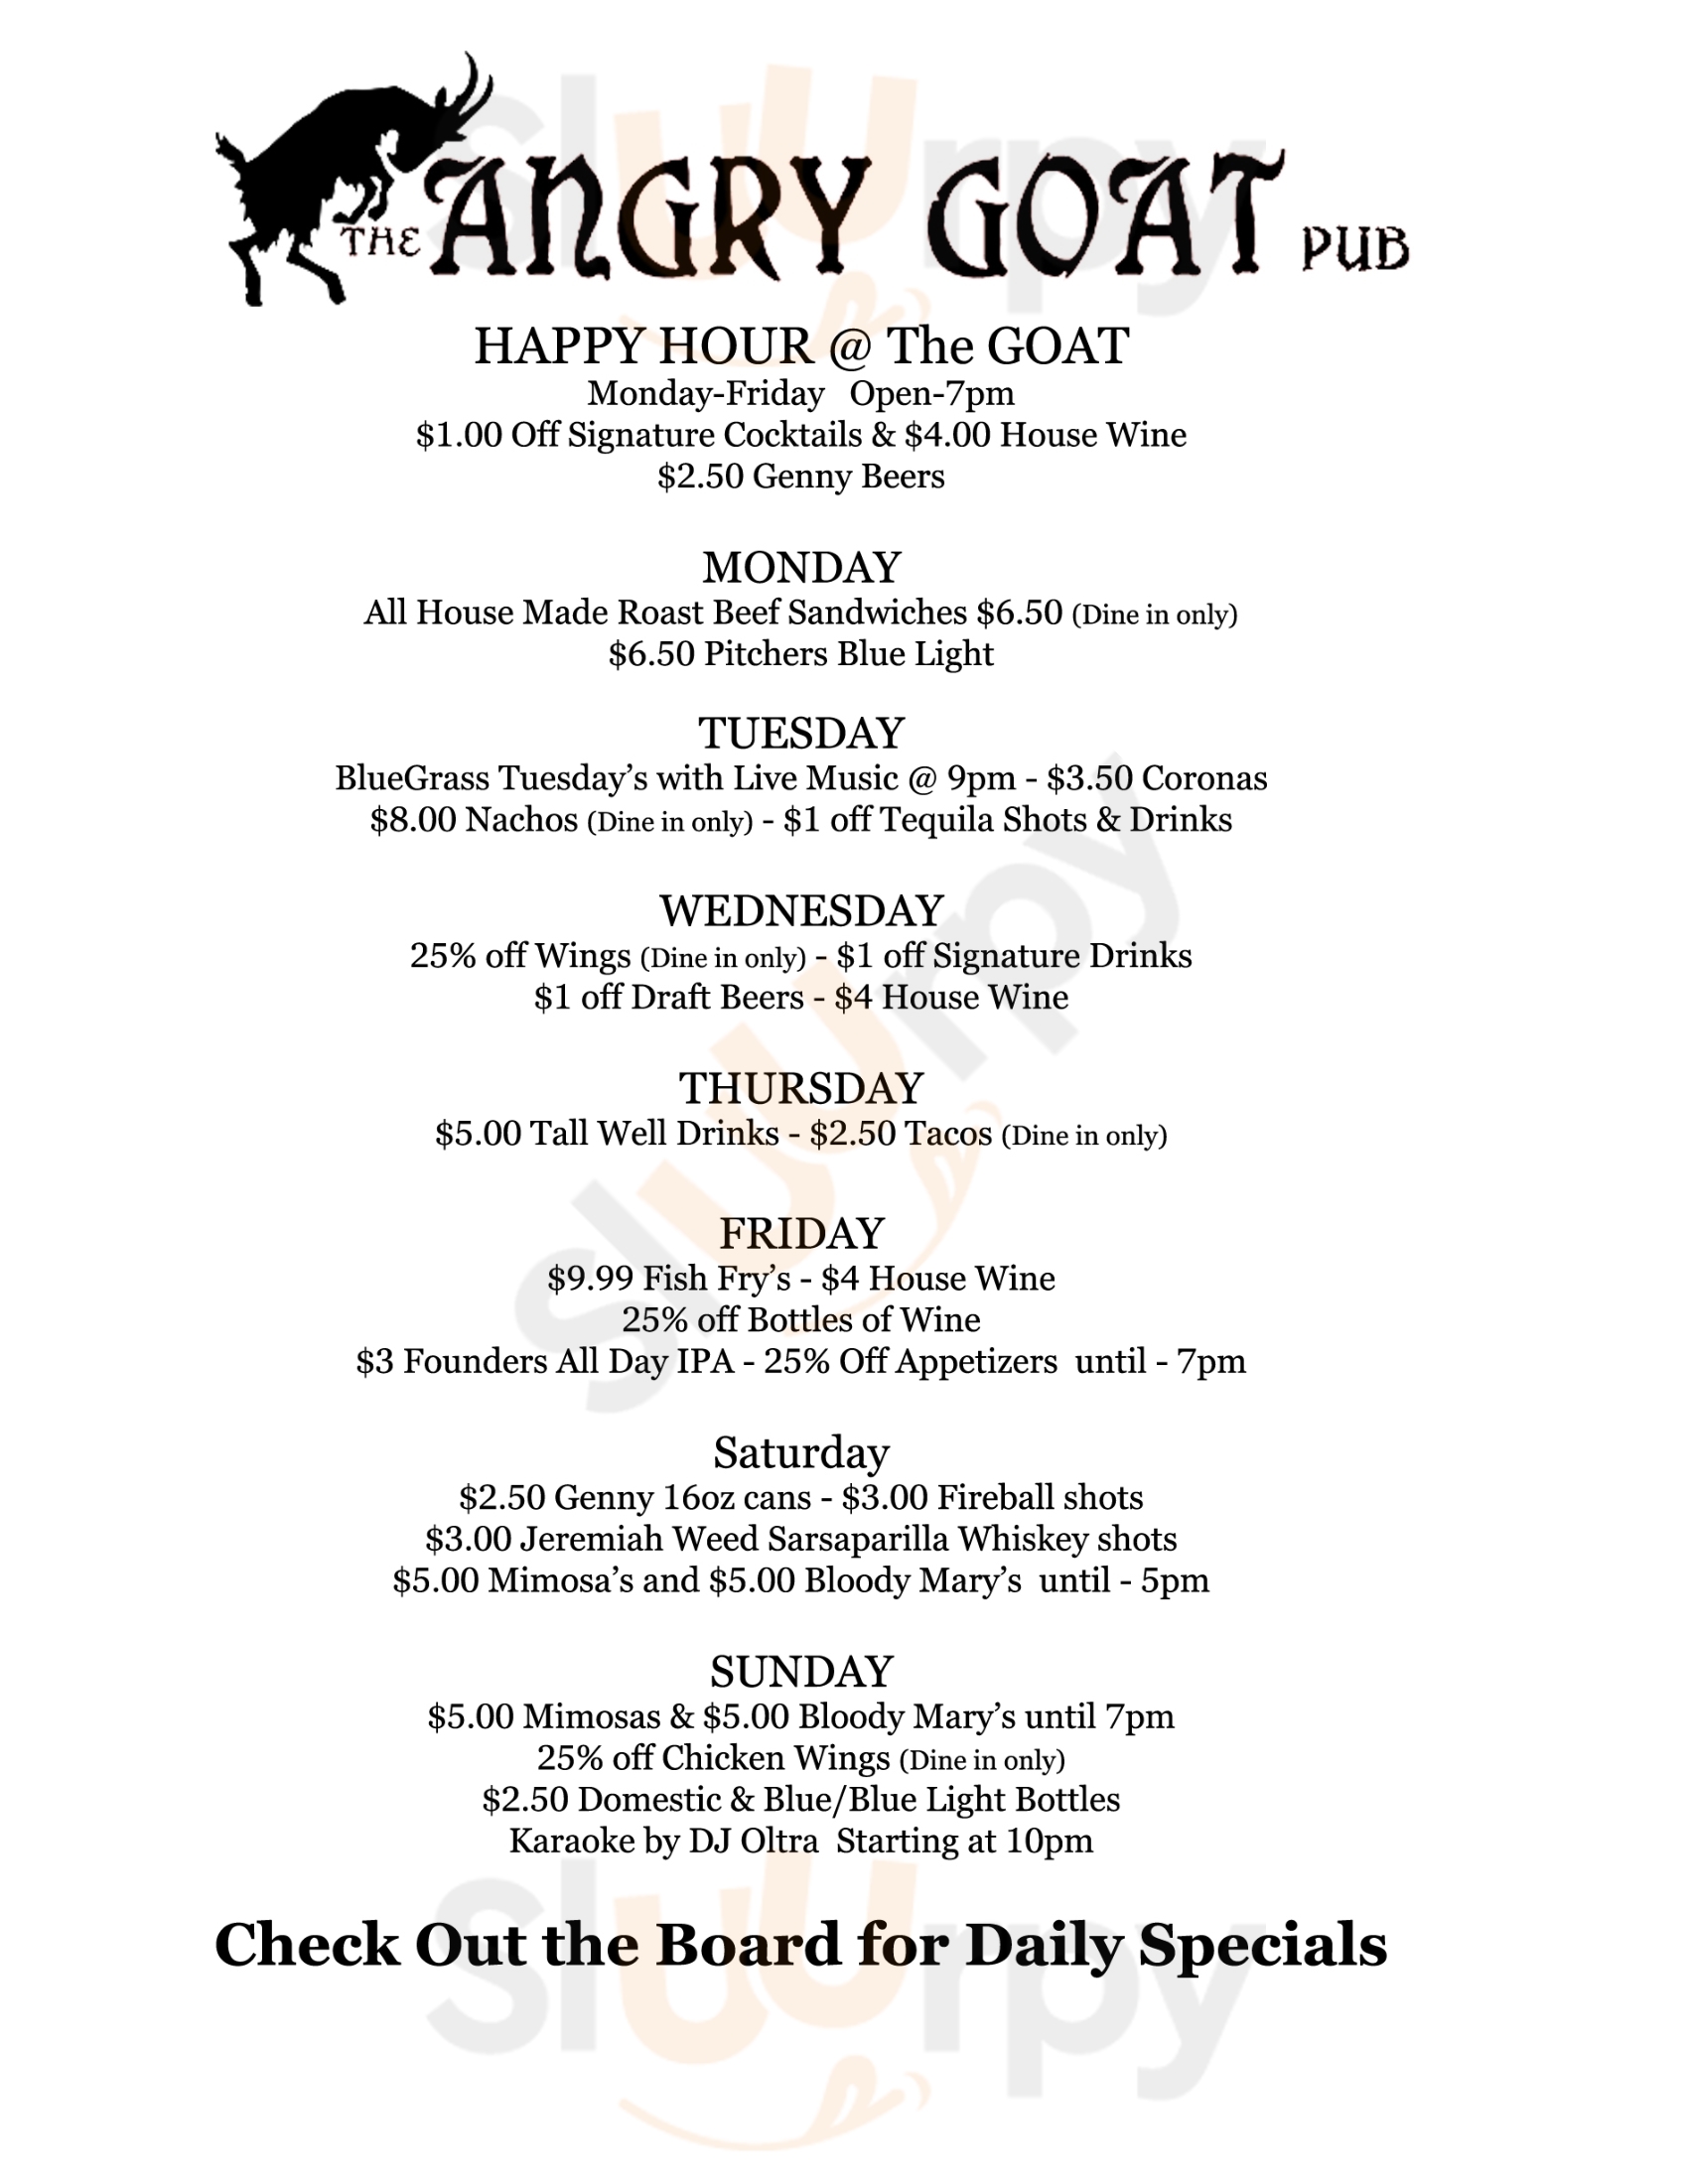 The Angry Goat Pub Rochester Menu - 1